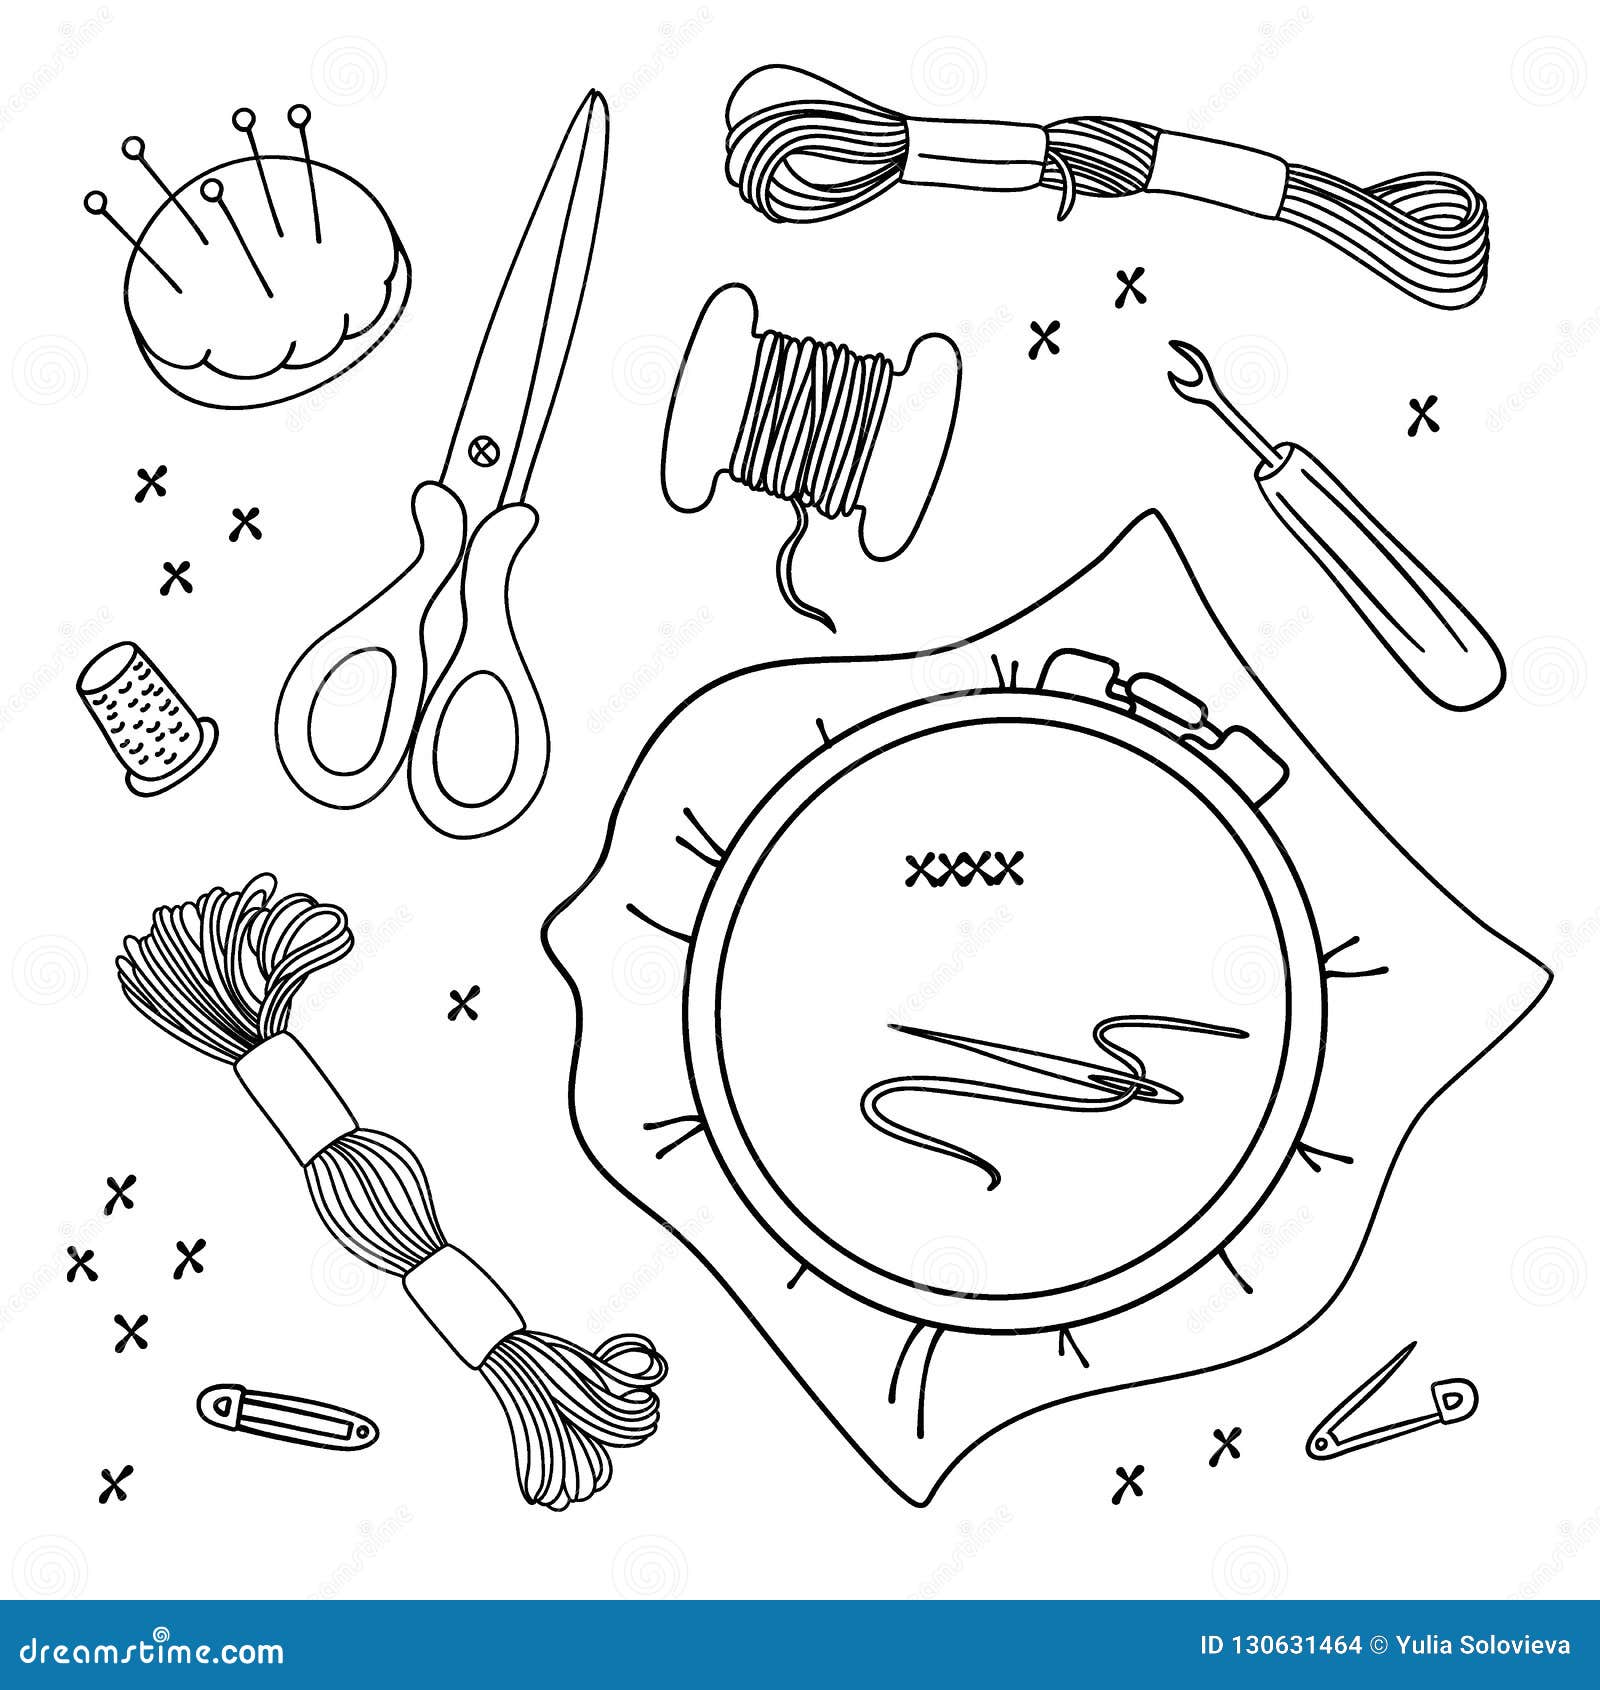 Premium Vector  Set of hand drawn embroidery accessories equipment